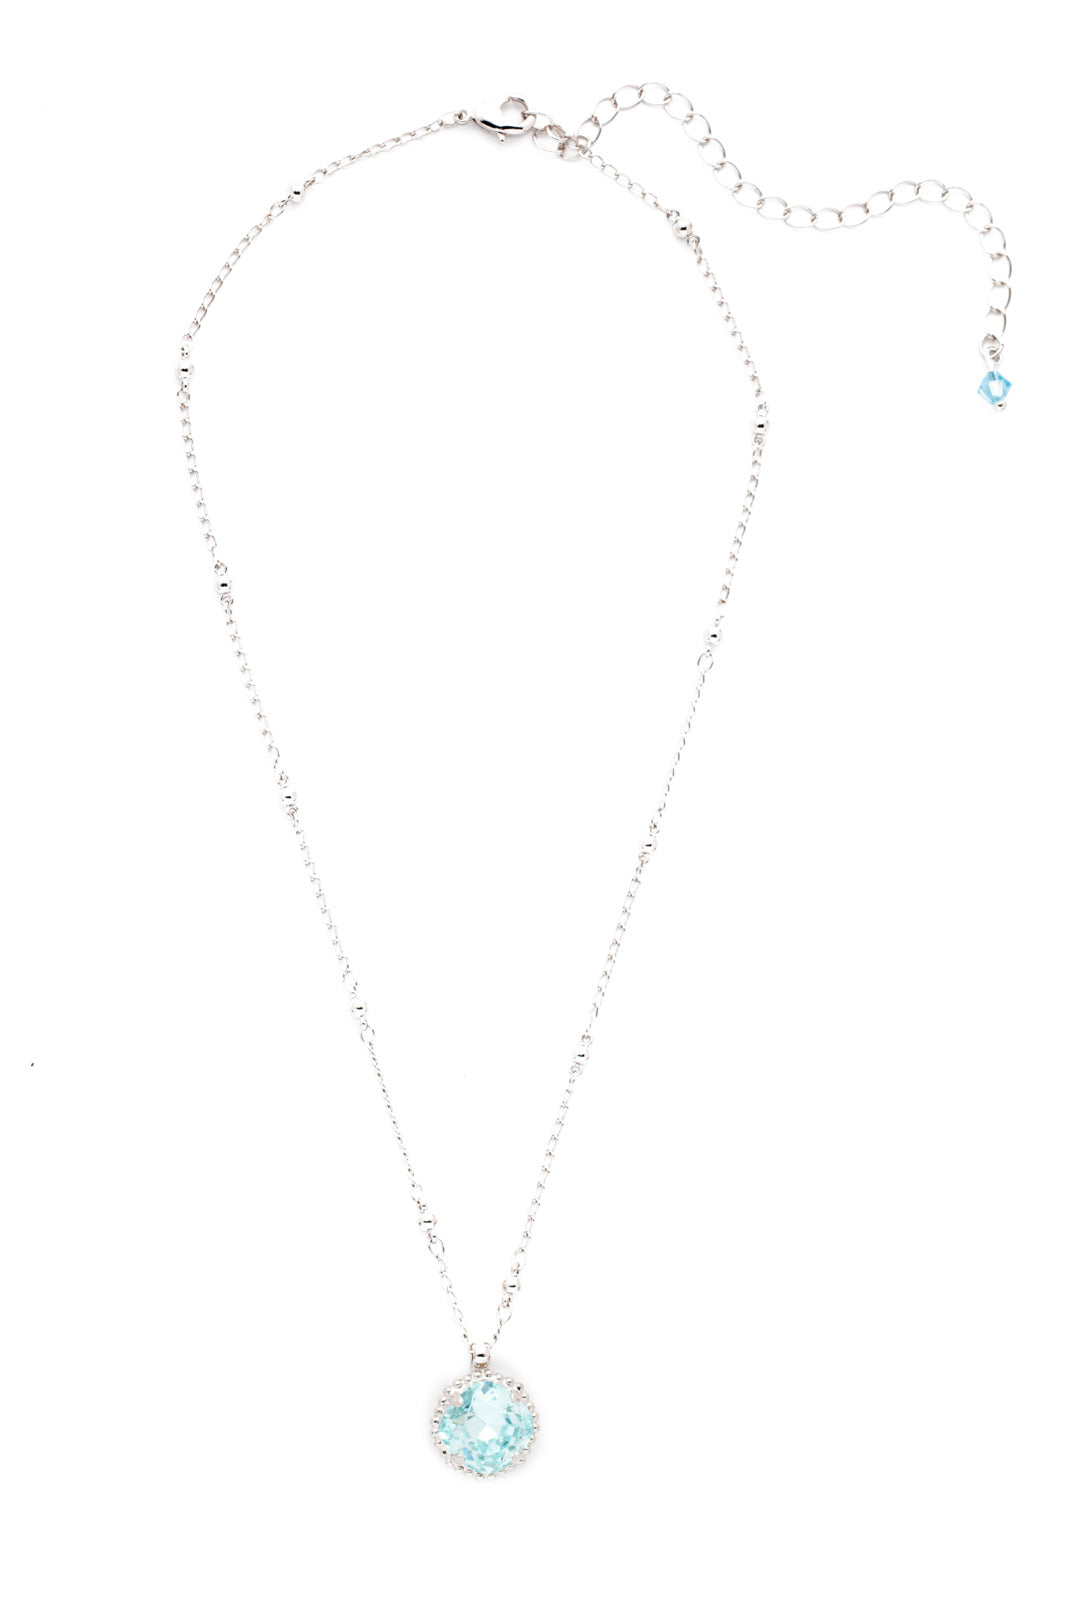 Cushion-Cut Pendant Necklace - NDS50RHLAQ